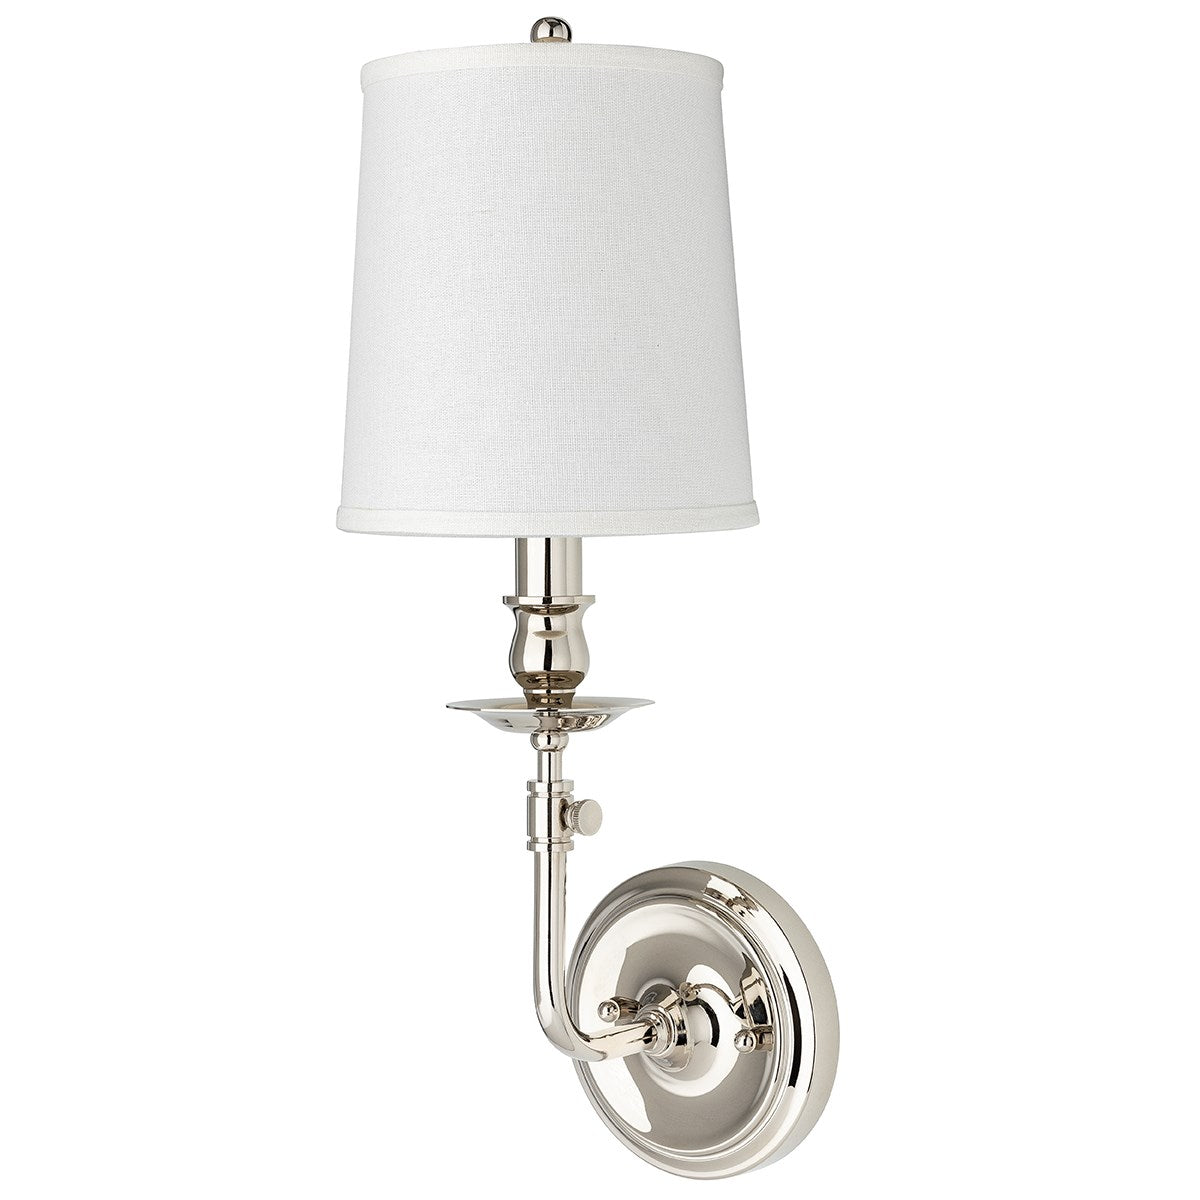 Logan - 1 LIGHT WALL SCONCE Wall Light Fixtures Hudson Valley Polished Nickel  